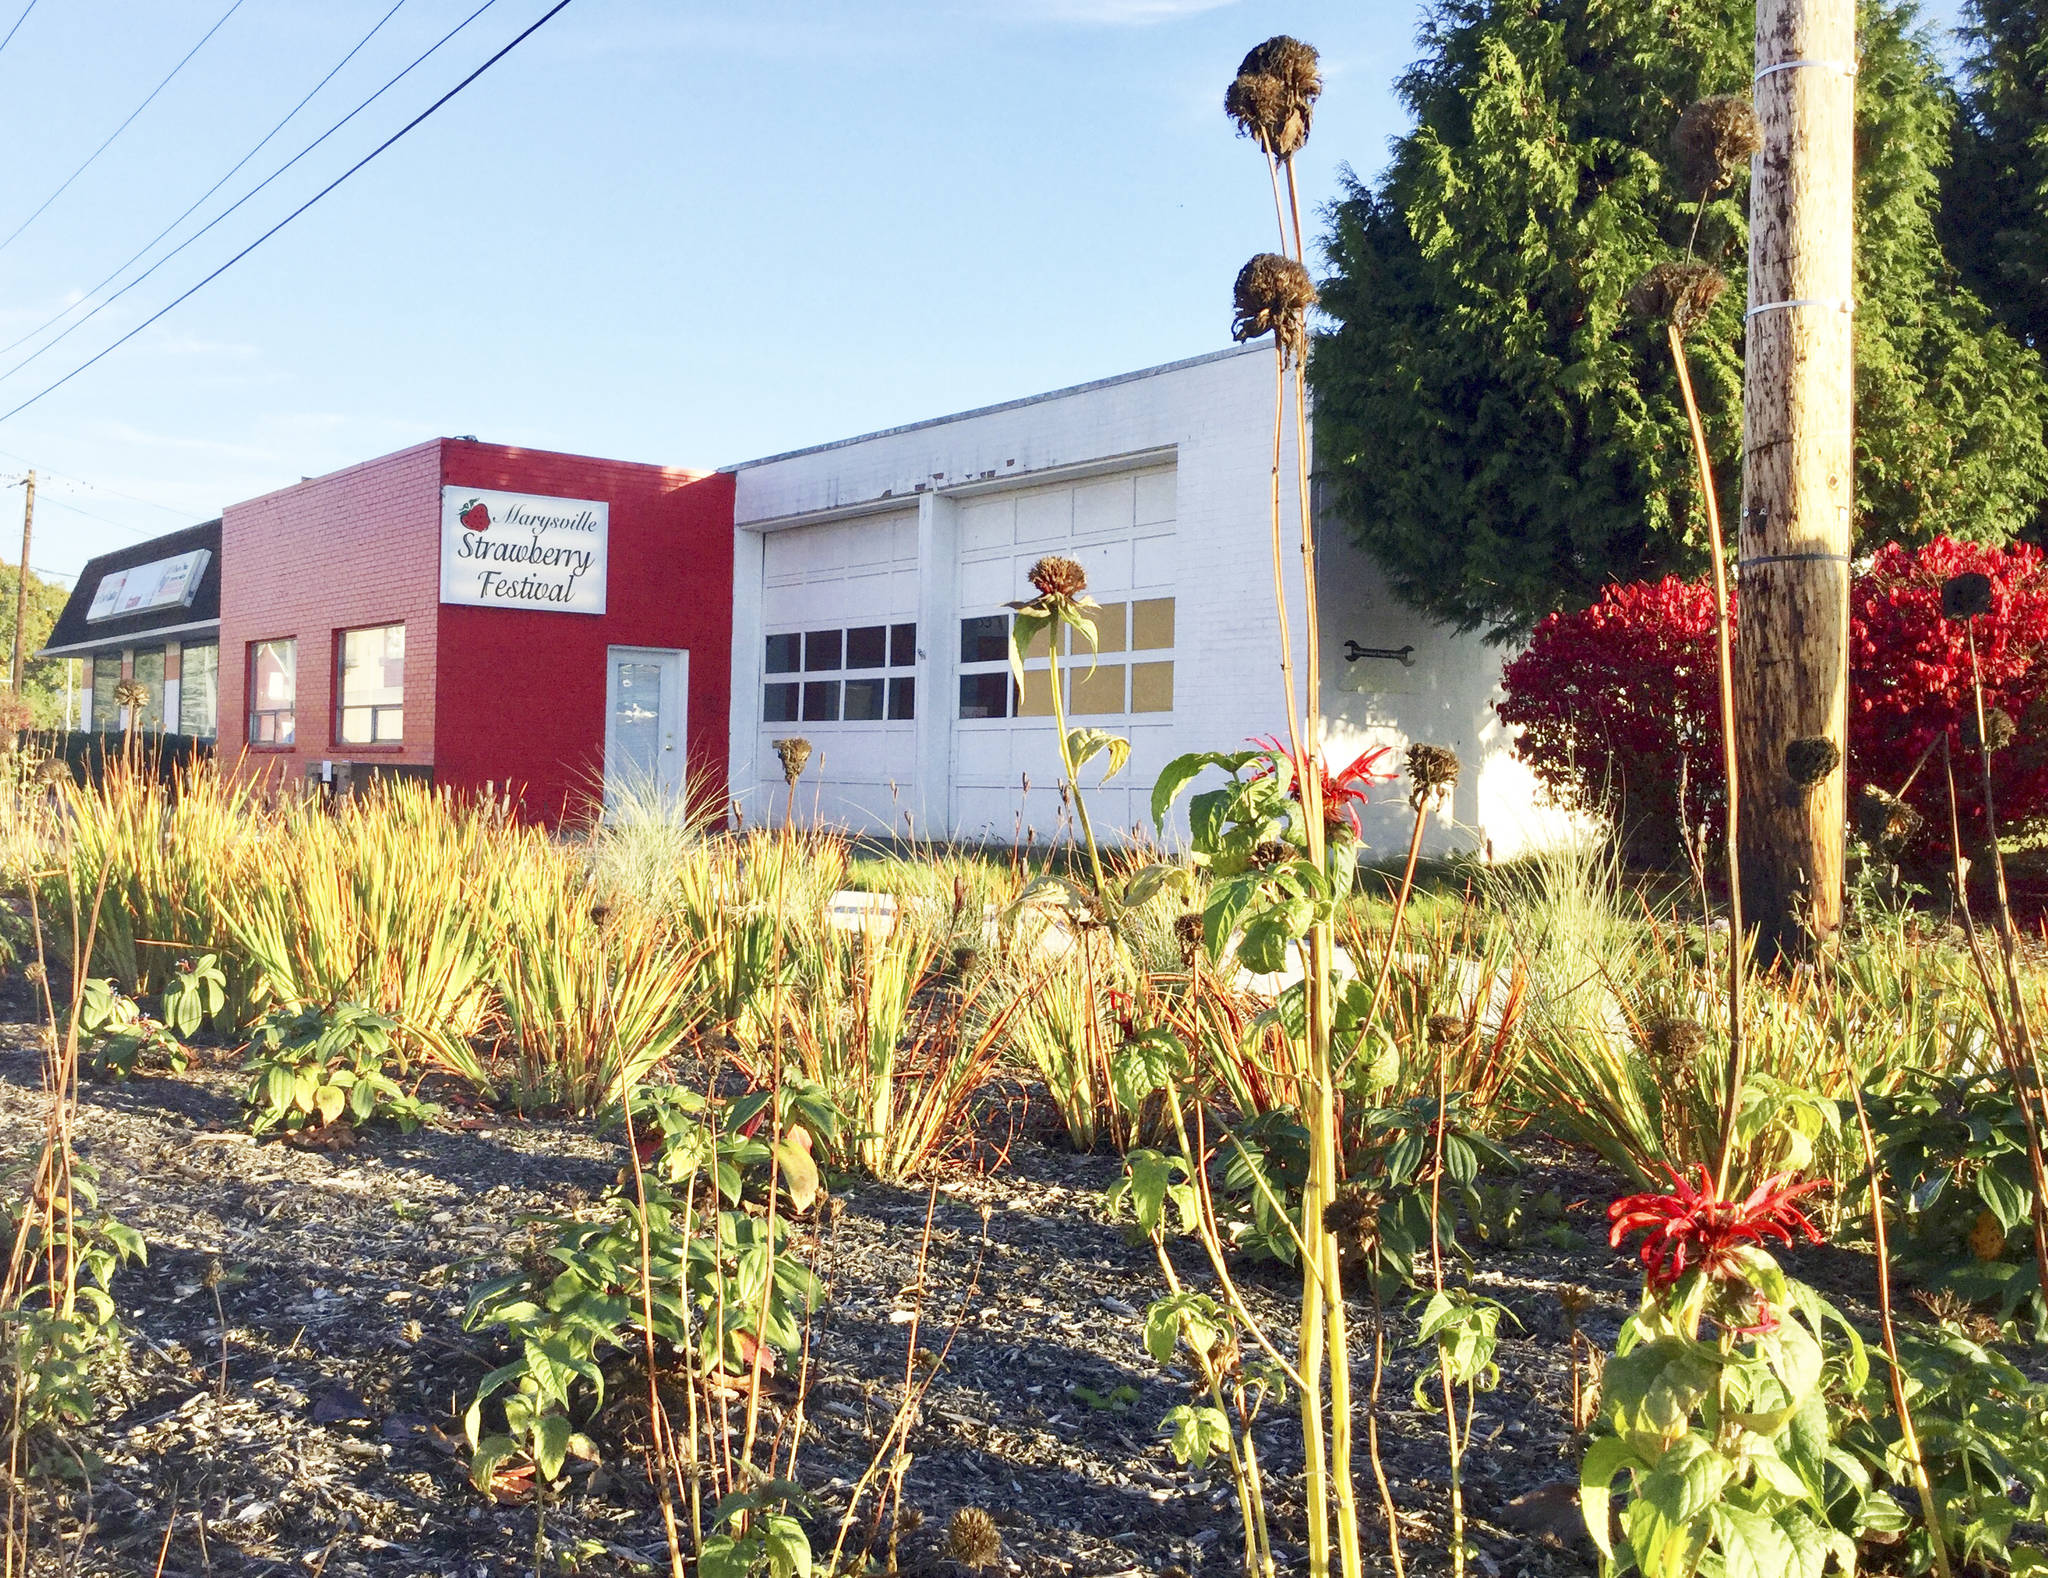 An Oct. 25 open house is planned for the Marysville Strawberry Festival’s new location at 1412 First St. in front of Ebey Waterfront Park.